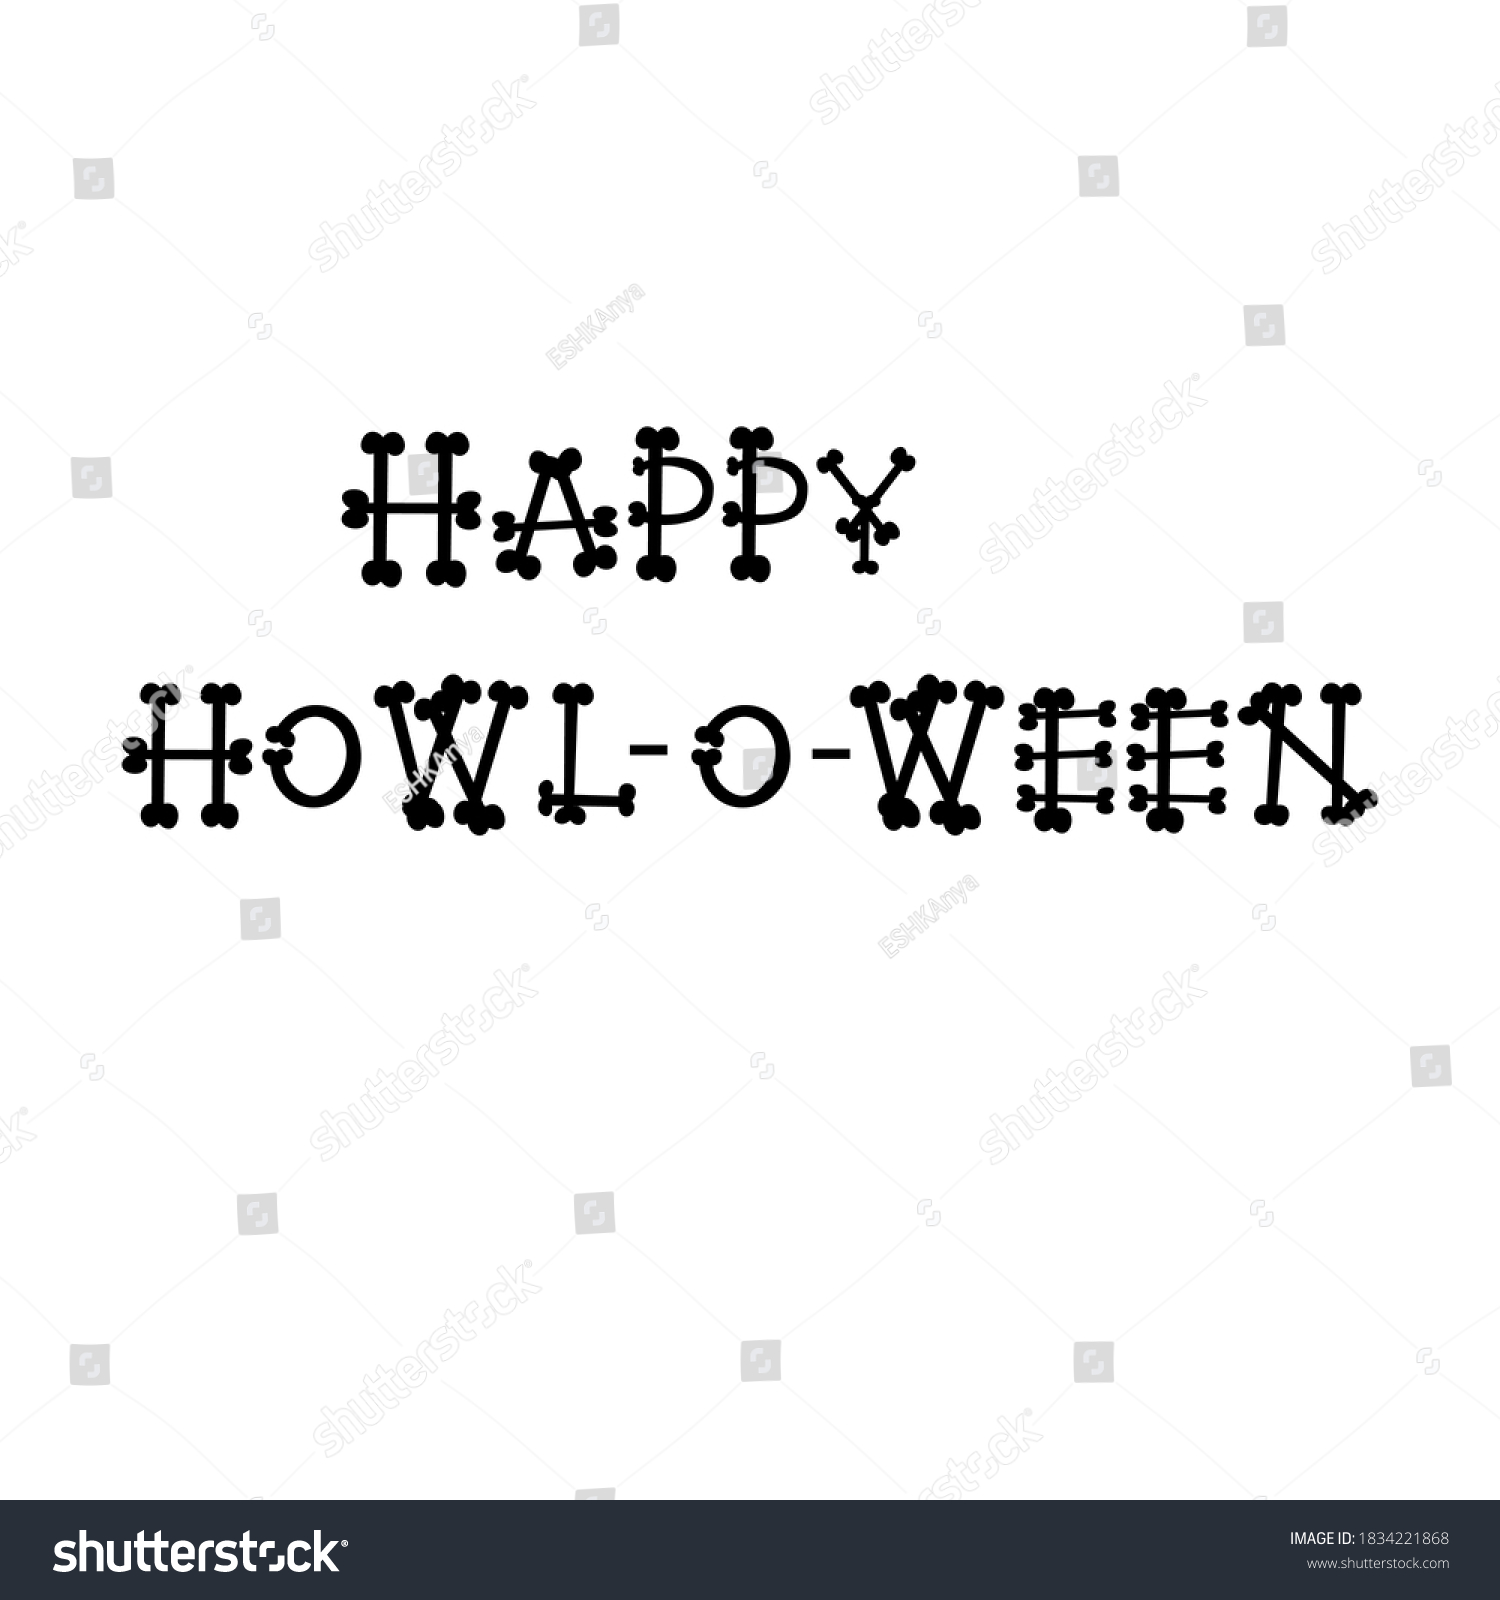 SVG of HAPPY HOWL-O-WEEN. Hand drawn doodle Halloween quote for poster, greeting card, print or banner. Vector holiday illustration isolated on white background	 svg